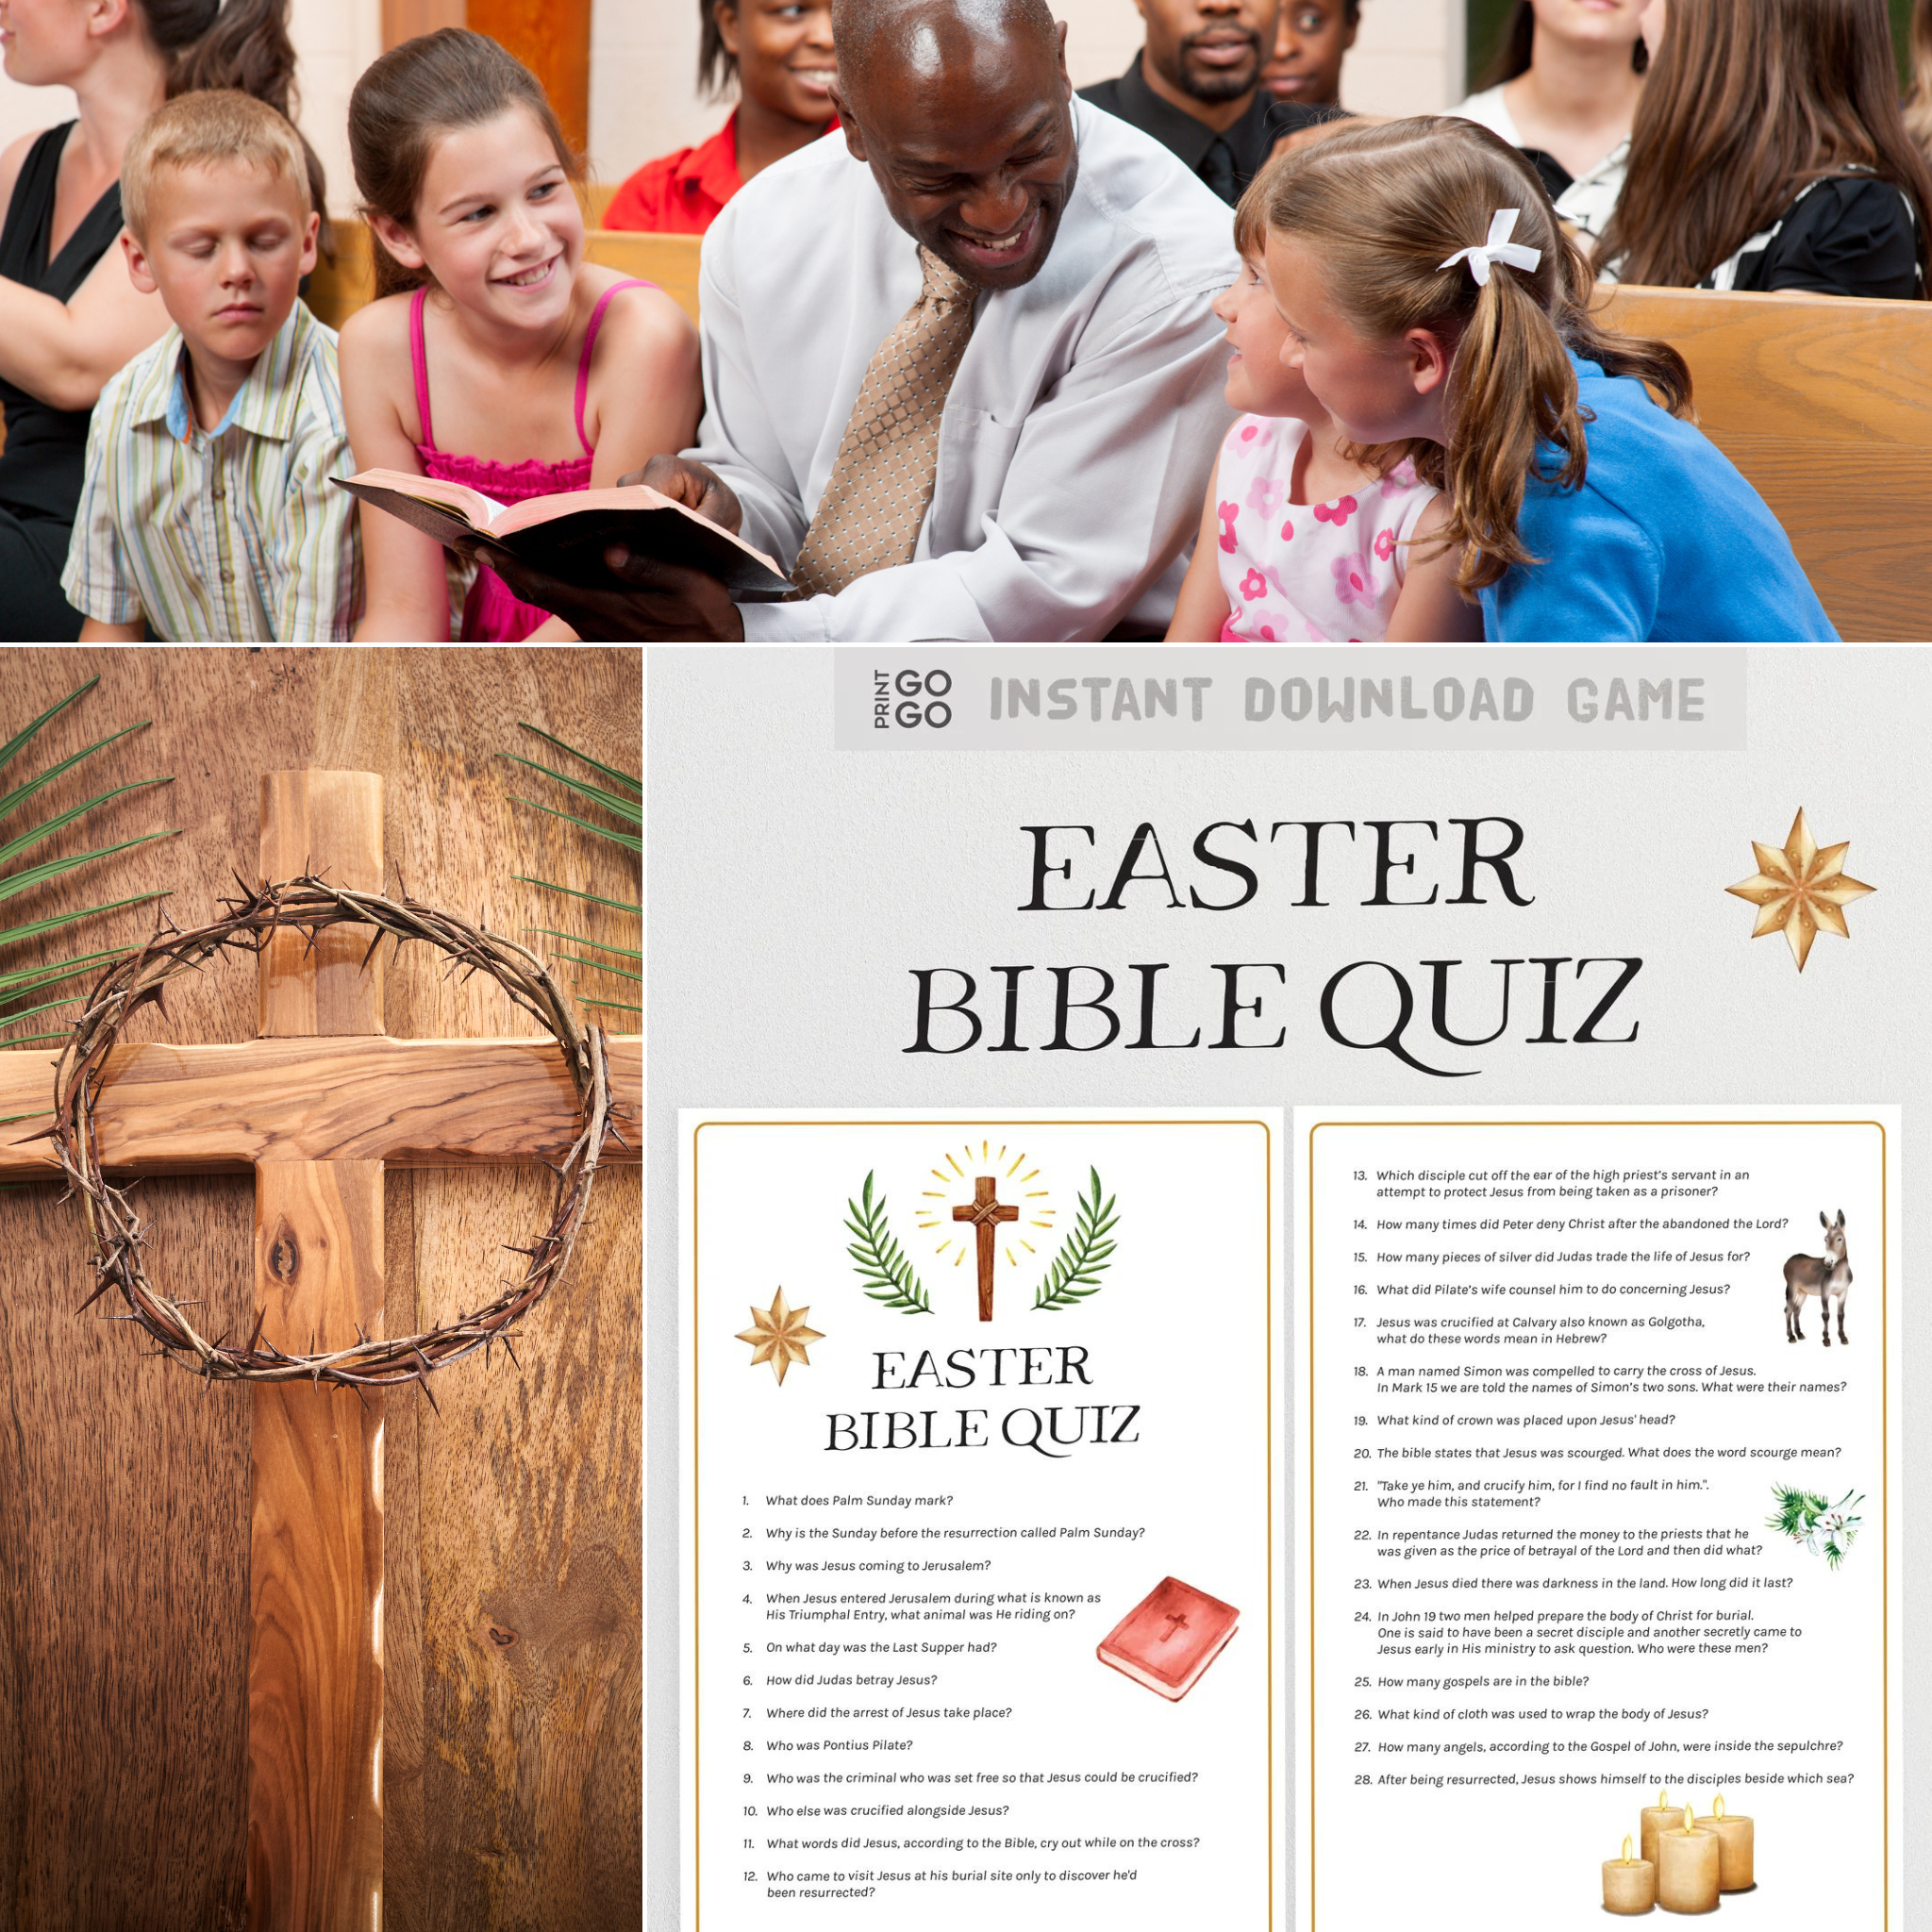 Easter Bible Quiz: Put your knowledge to the test!